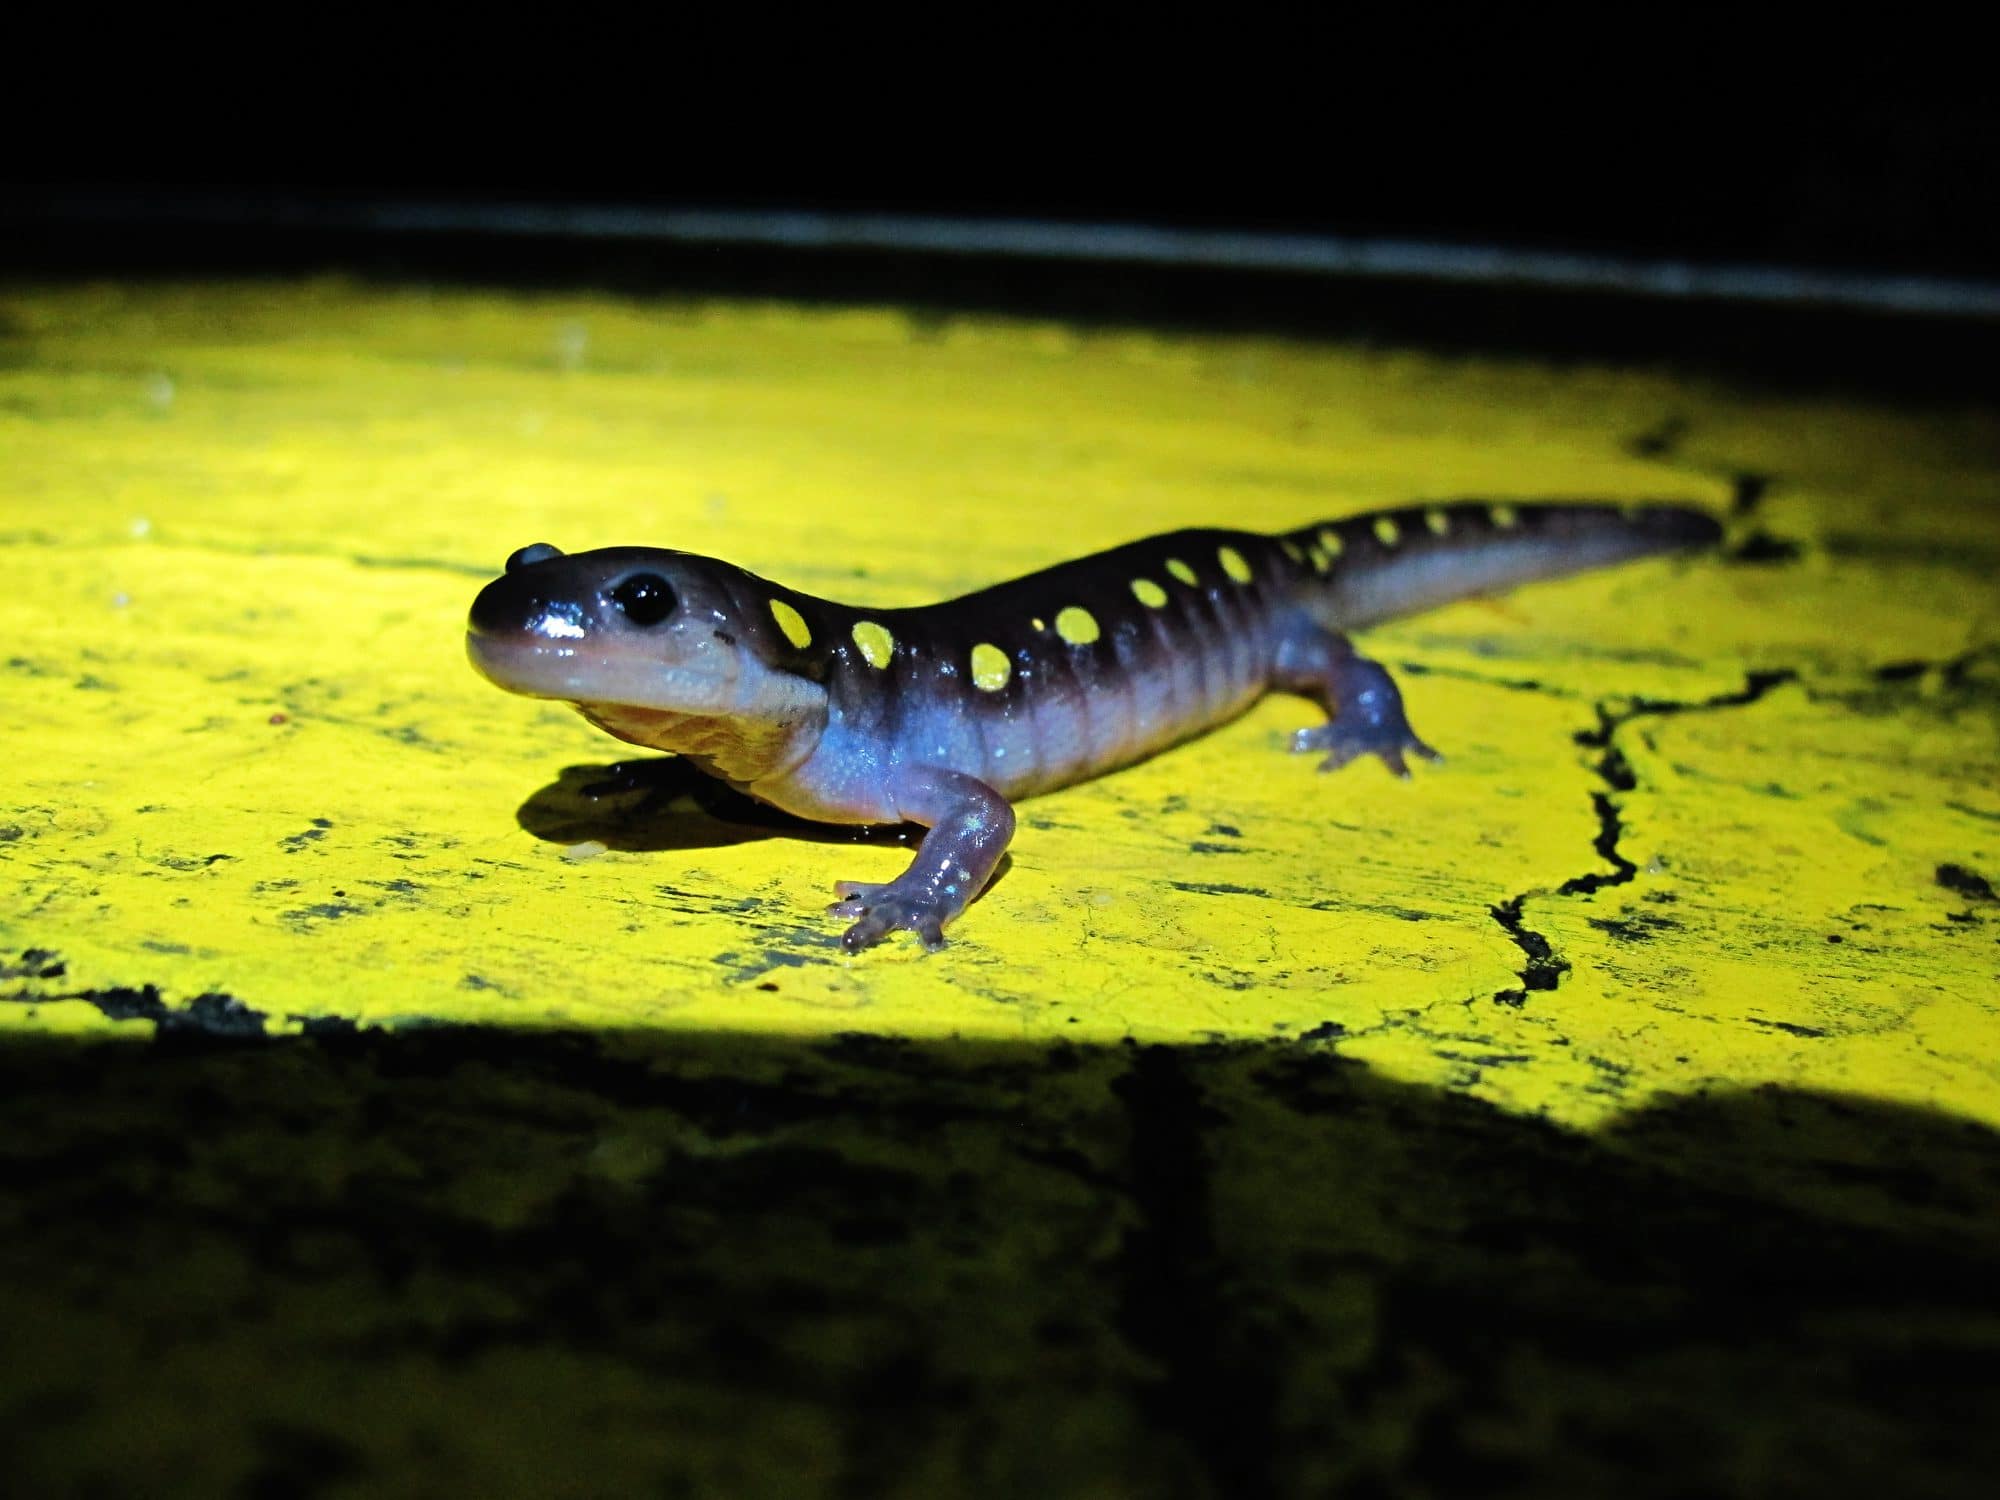 A spotted salamander makes its way across North Lincoln Street in Keene. (photo © Brett Amy Thelen)